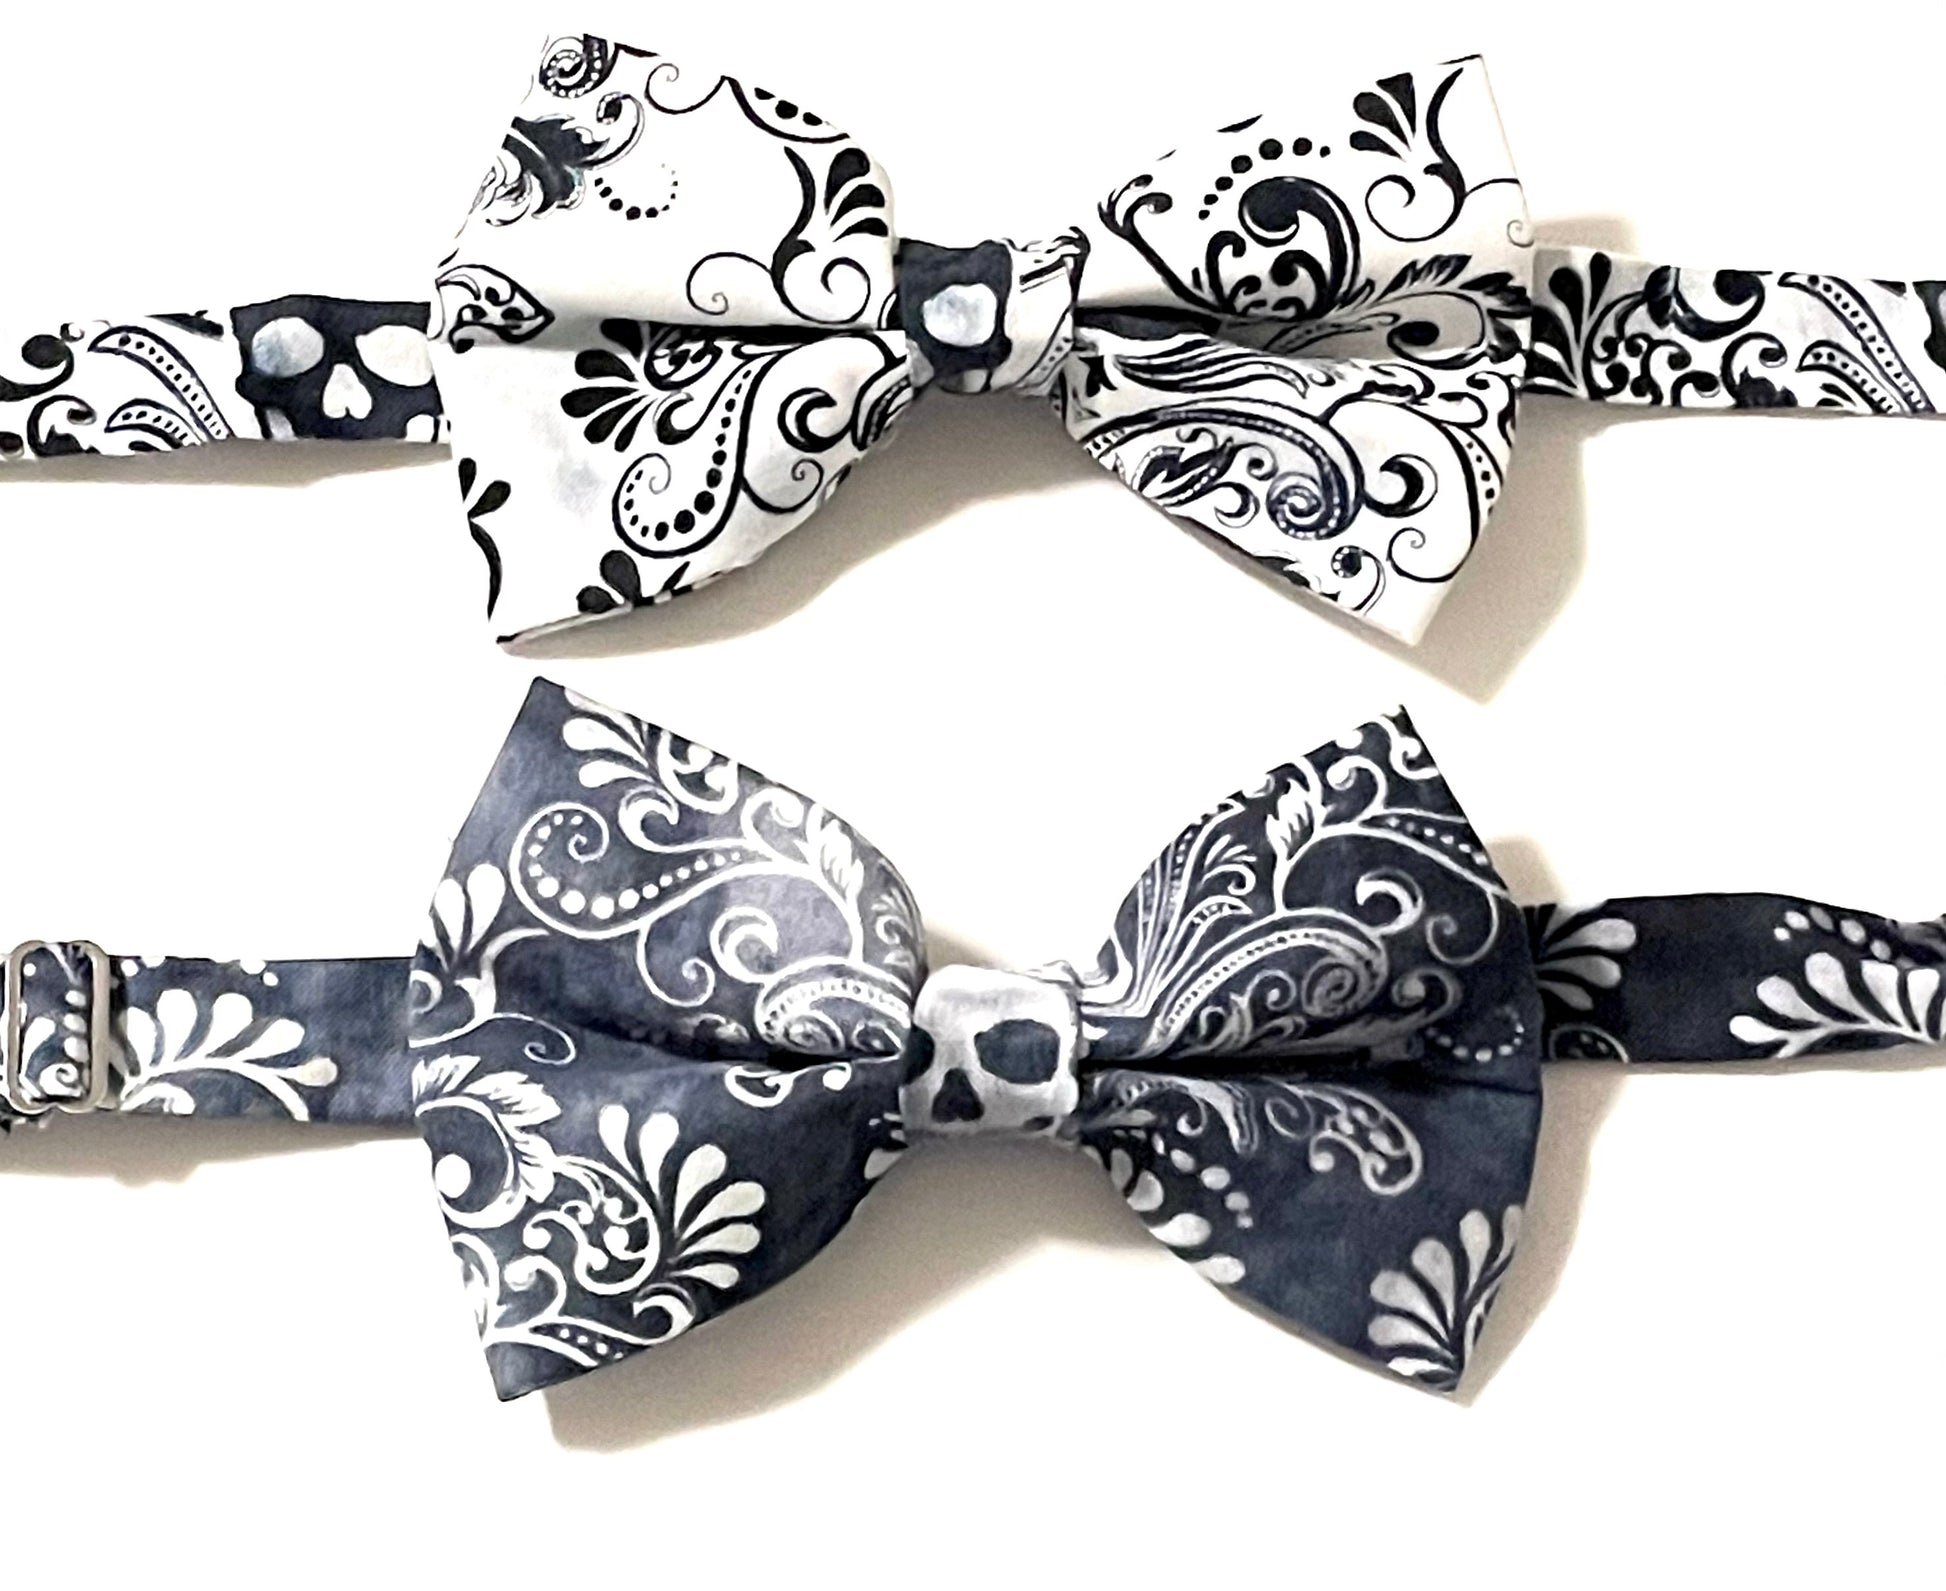 Black and White skulls bow tie with a white purposely faded print. Skulls may fall anywhere on the bow tie